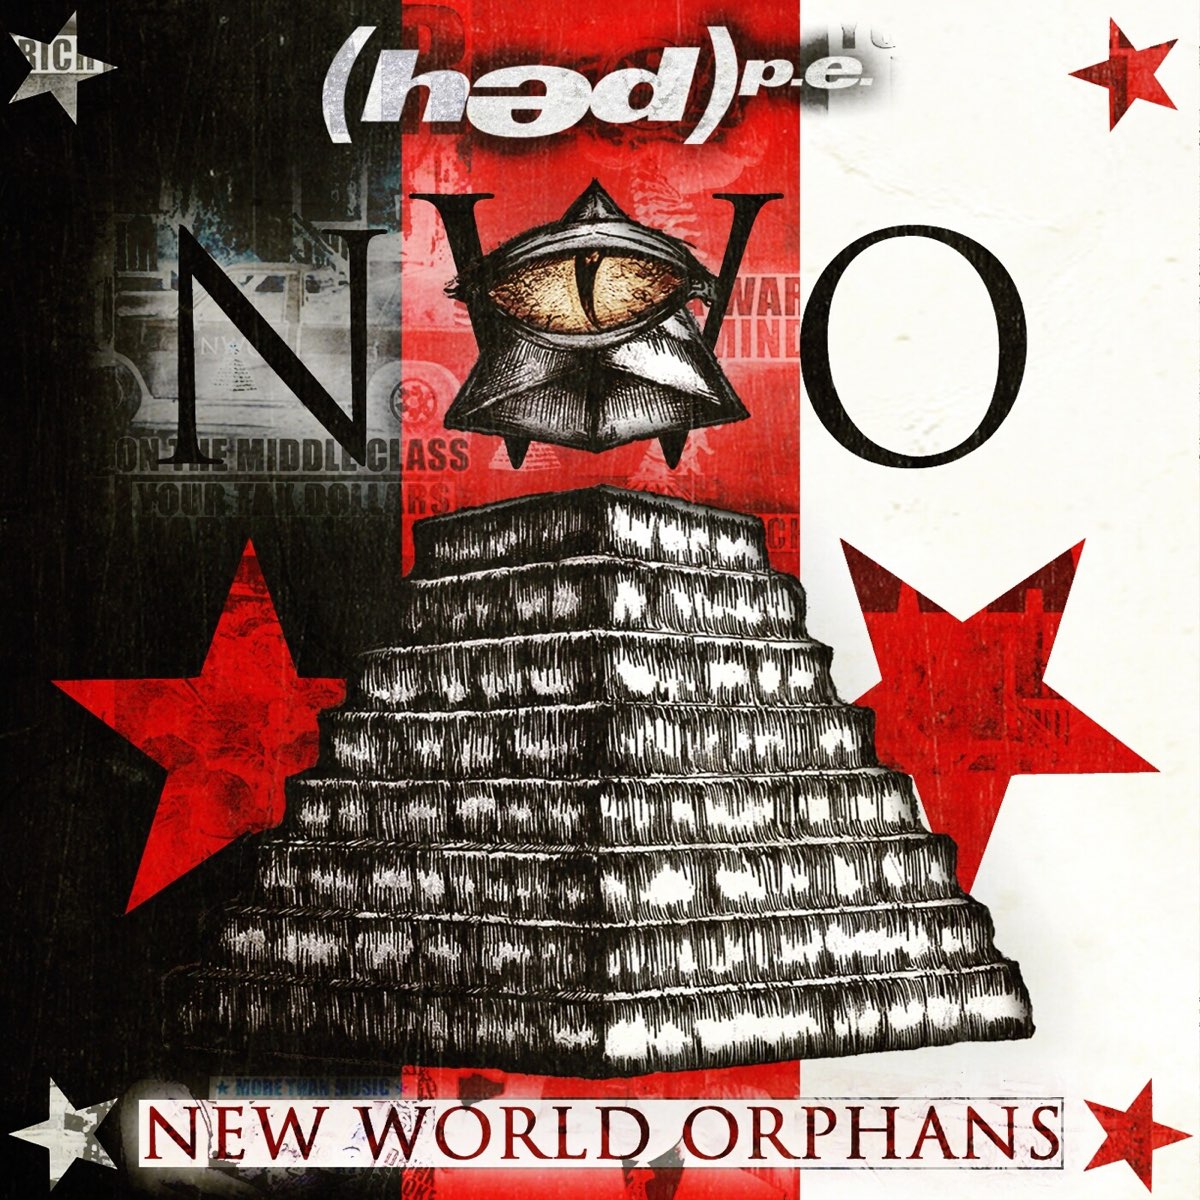 New World Orphans - Album by (hed) p.e. - Apple Music